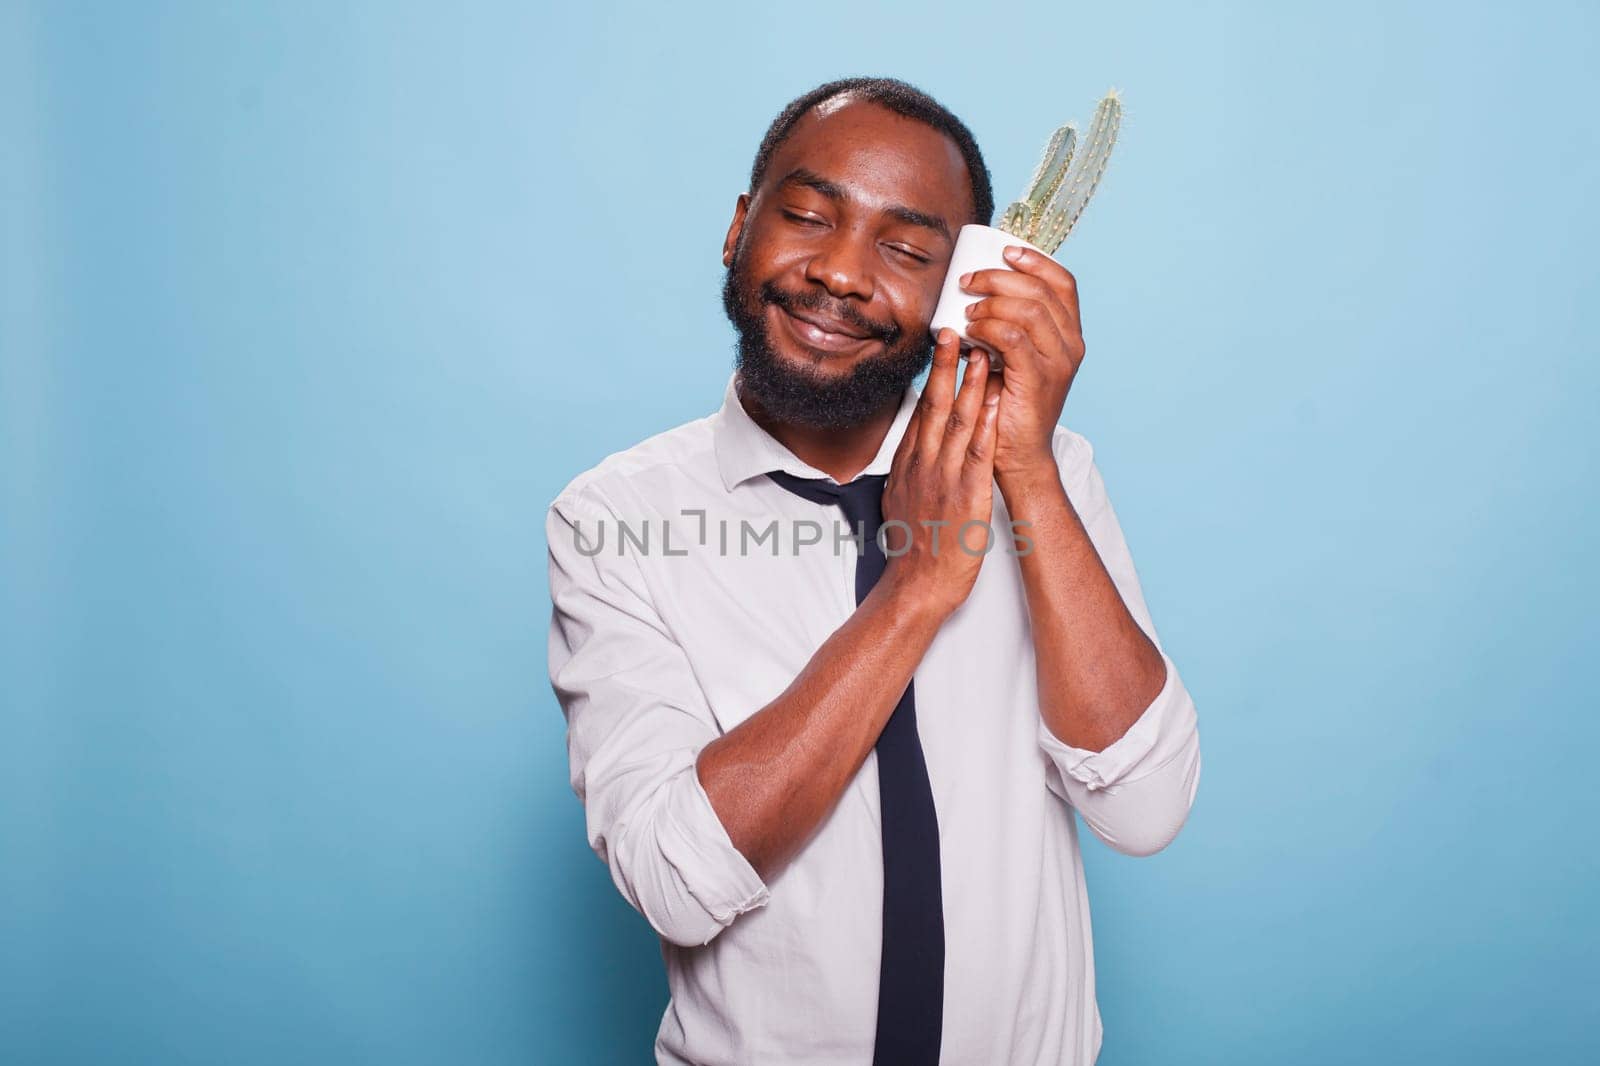 Young plant lover with eyes closed white pot with cactus to cheek showing love for houseplant. Smiling african american office worker with caring personality holding a potted plant.